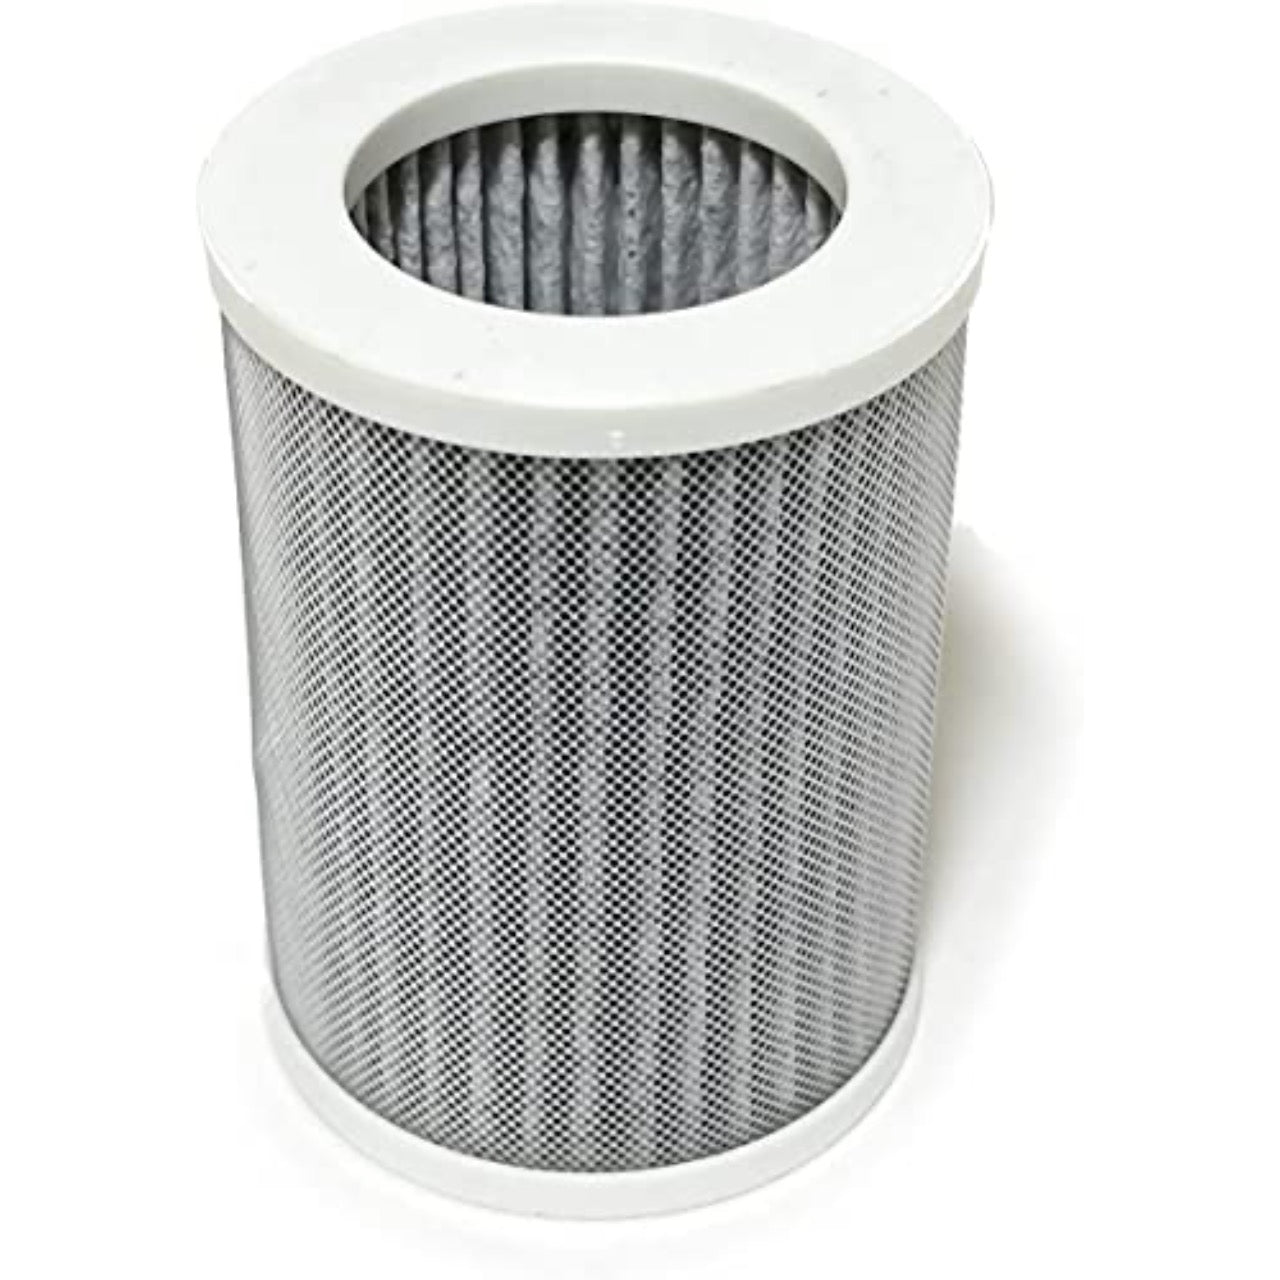 Nispira 3-In-1 True HEPA Activated Carbon Filters for Purezone Portable Mini Air Purifier (PEPERSAP)